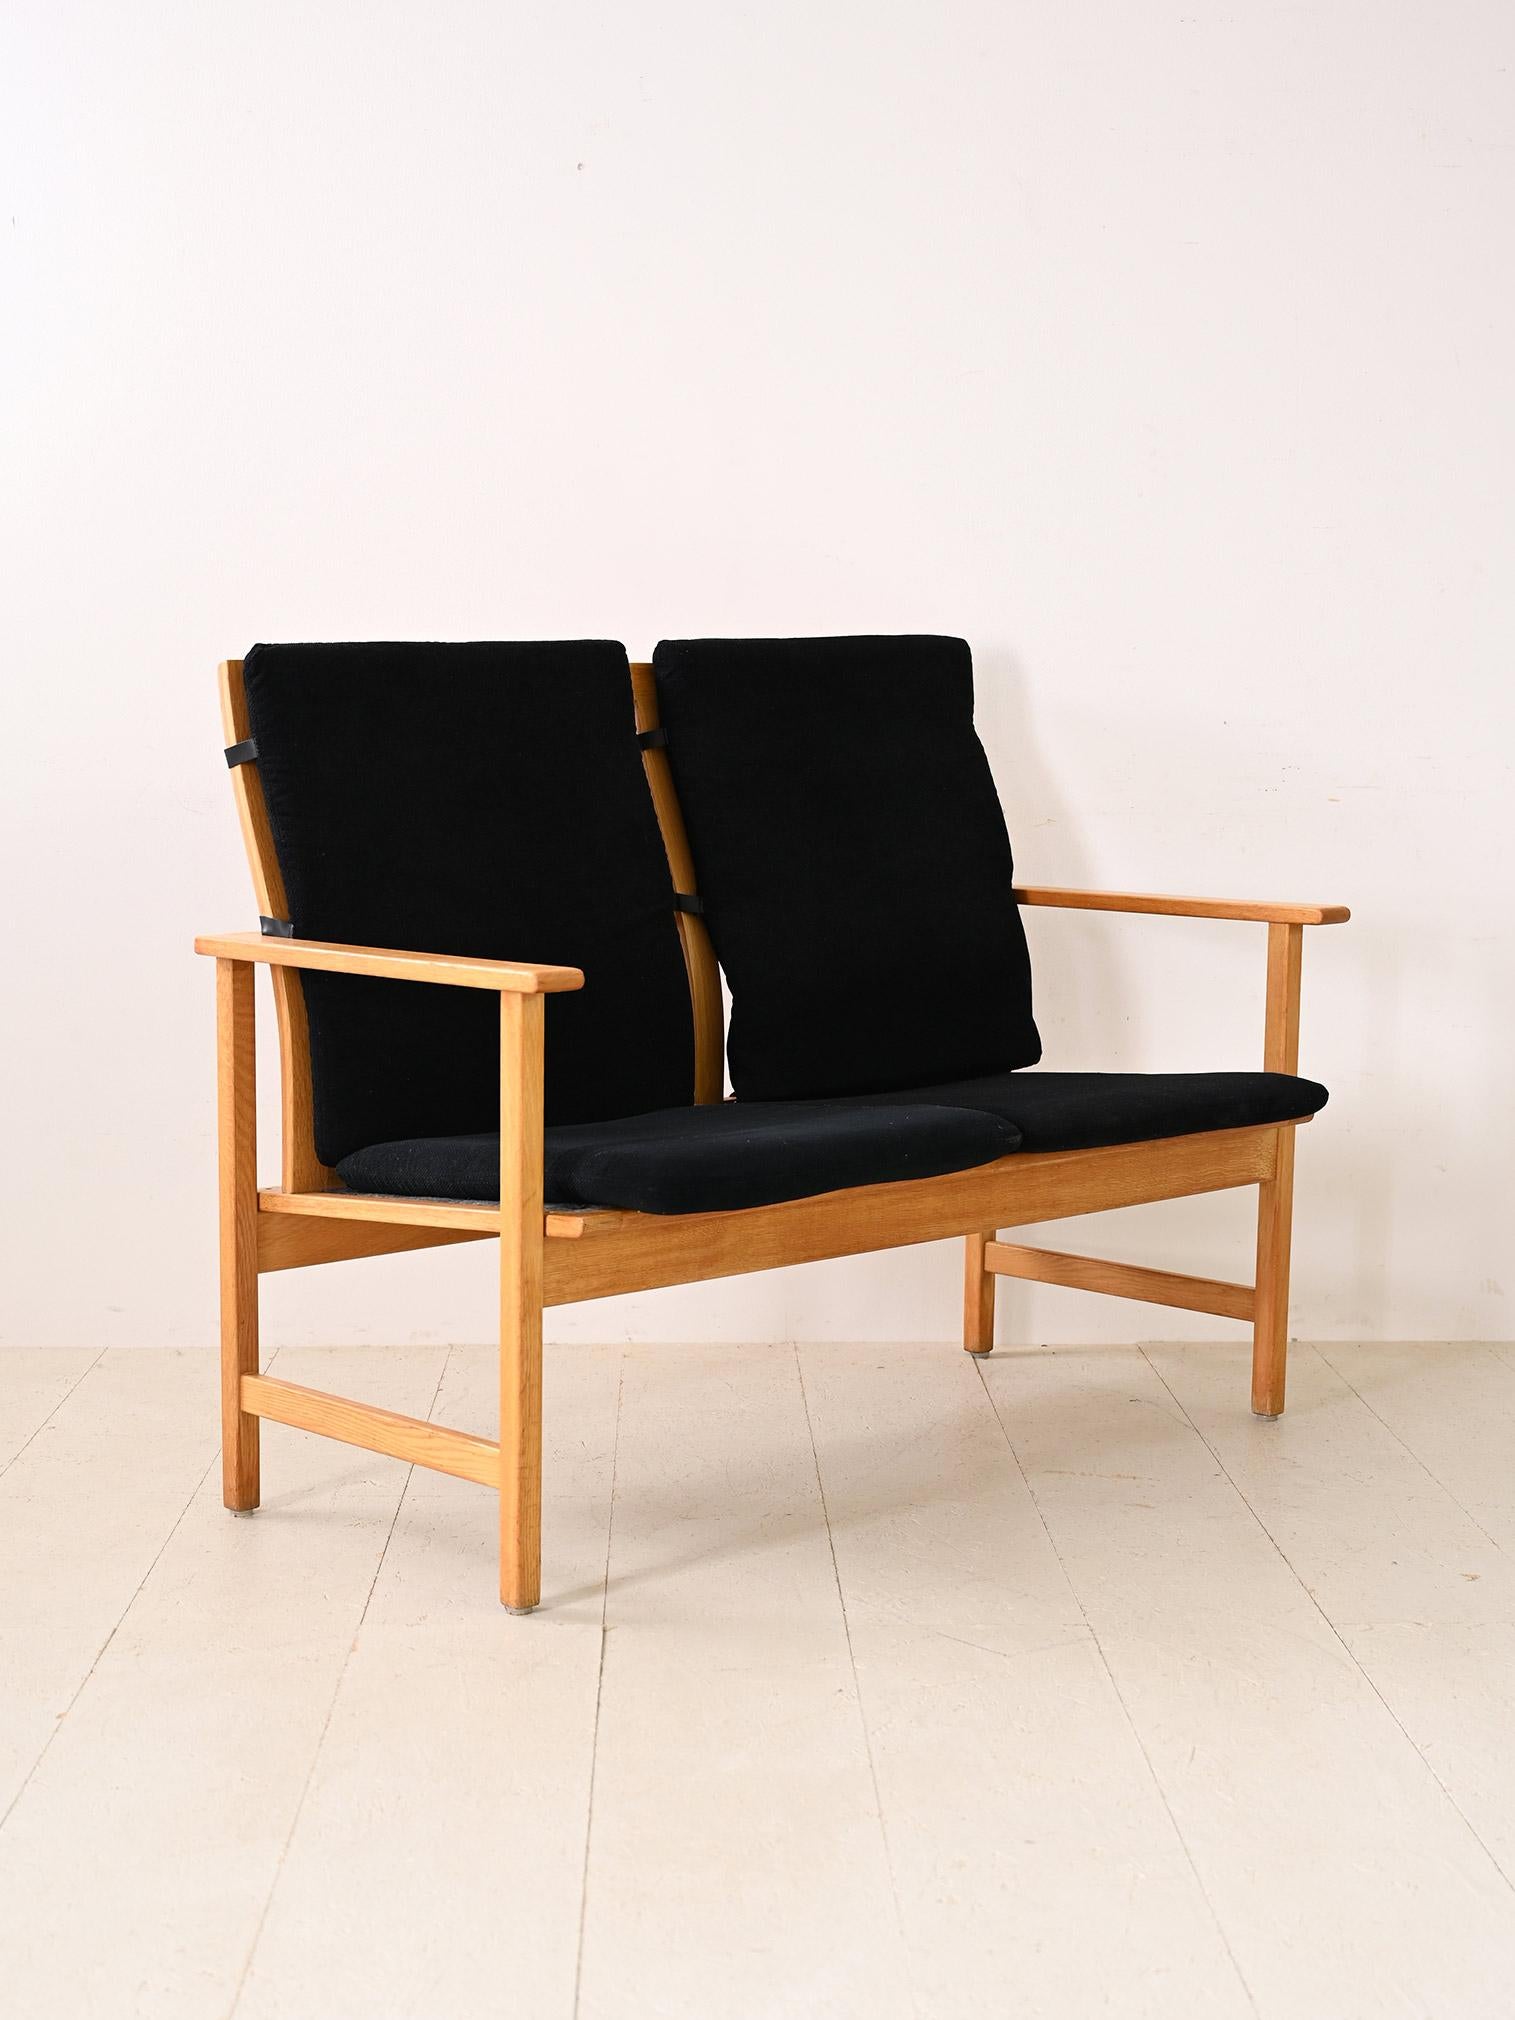 Two-seater sofa with oak wood frame. An original piece of Scandinavian modernism consisting of a simple wooden frame equipped with armrests and complemented by the original cushions found on the seat and back. The square, minimal lines make this